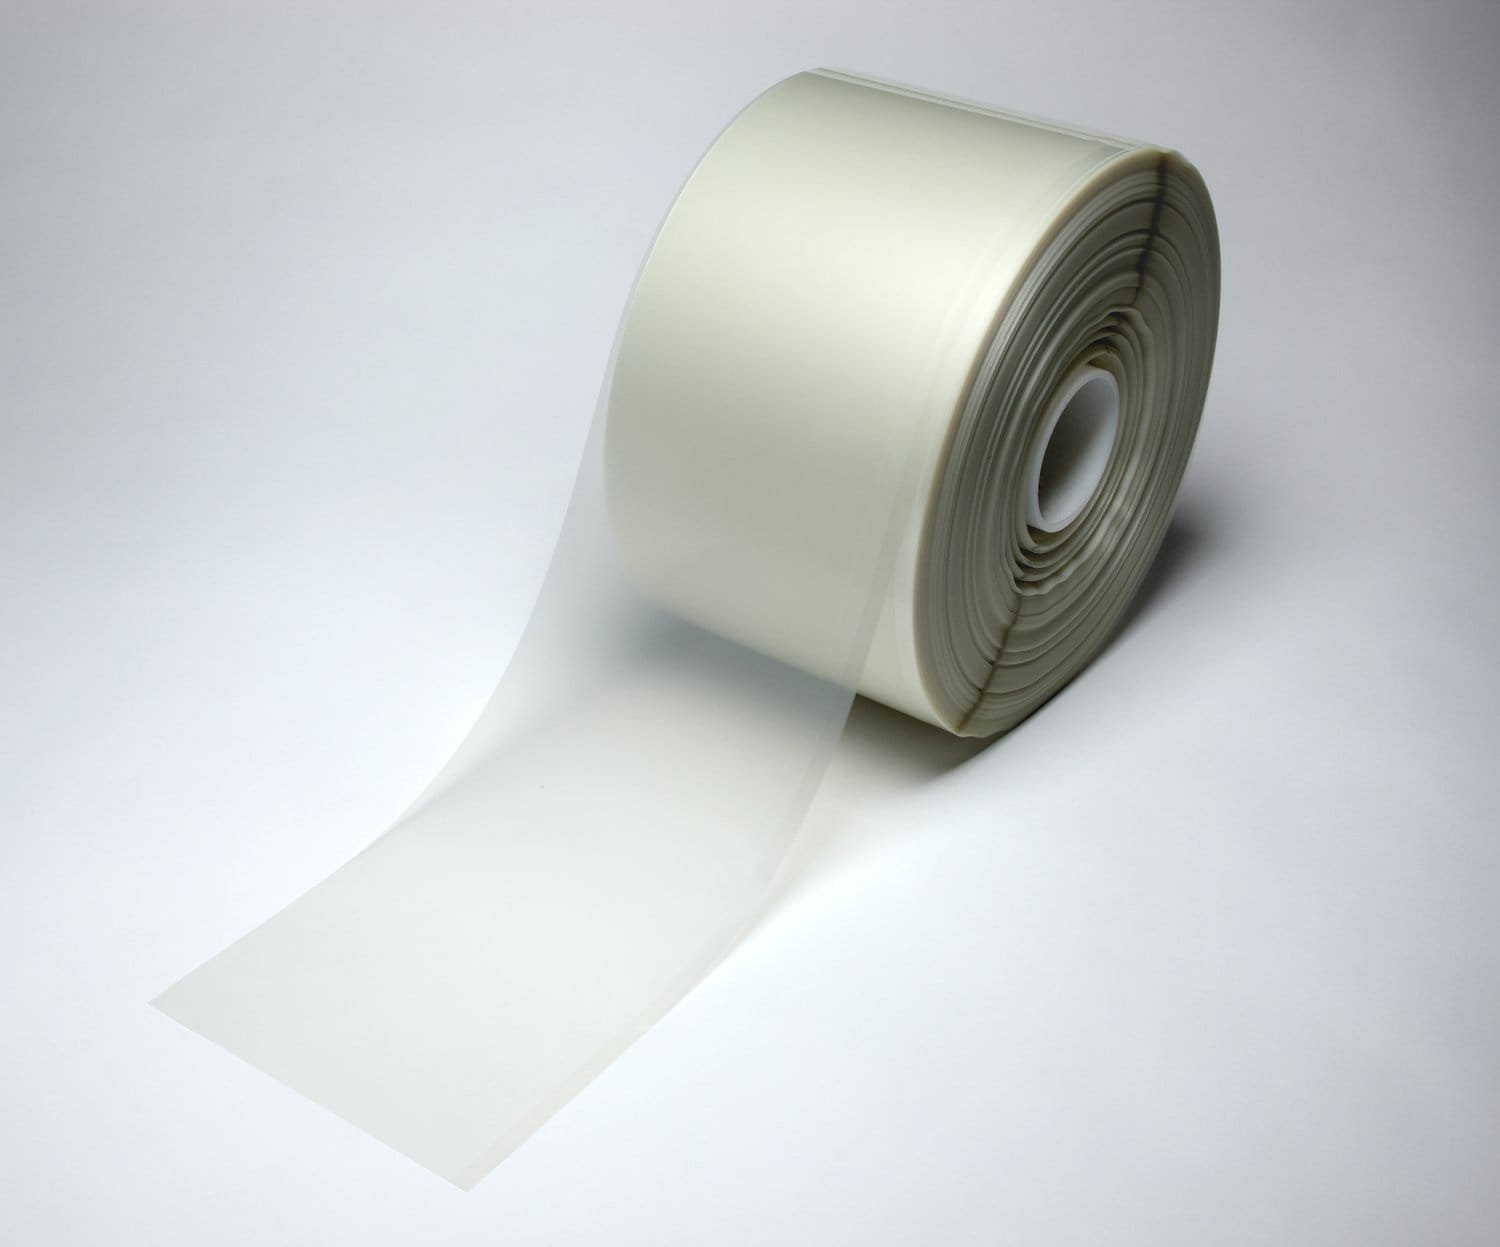 7010535536 - 3M Optically Clear Adhesive 8212, 12 in x 180 yds